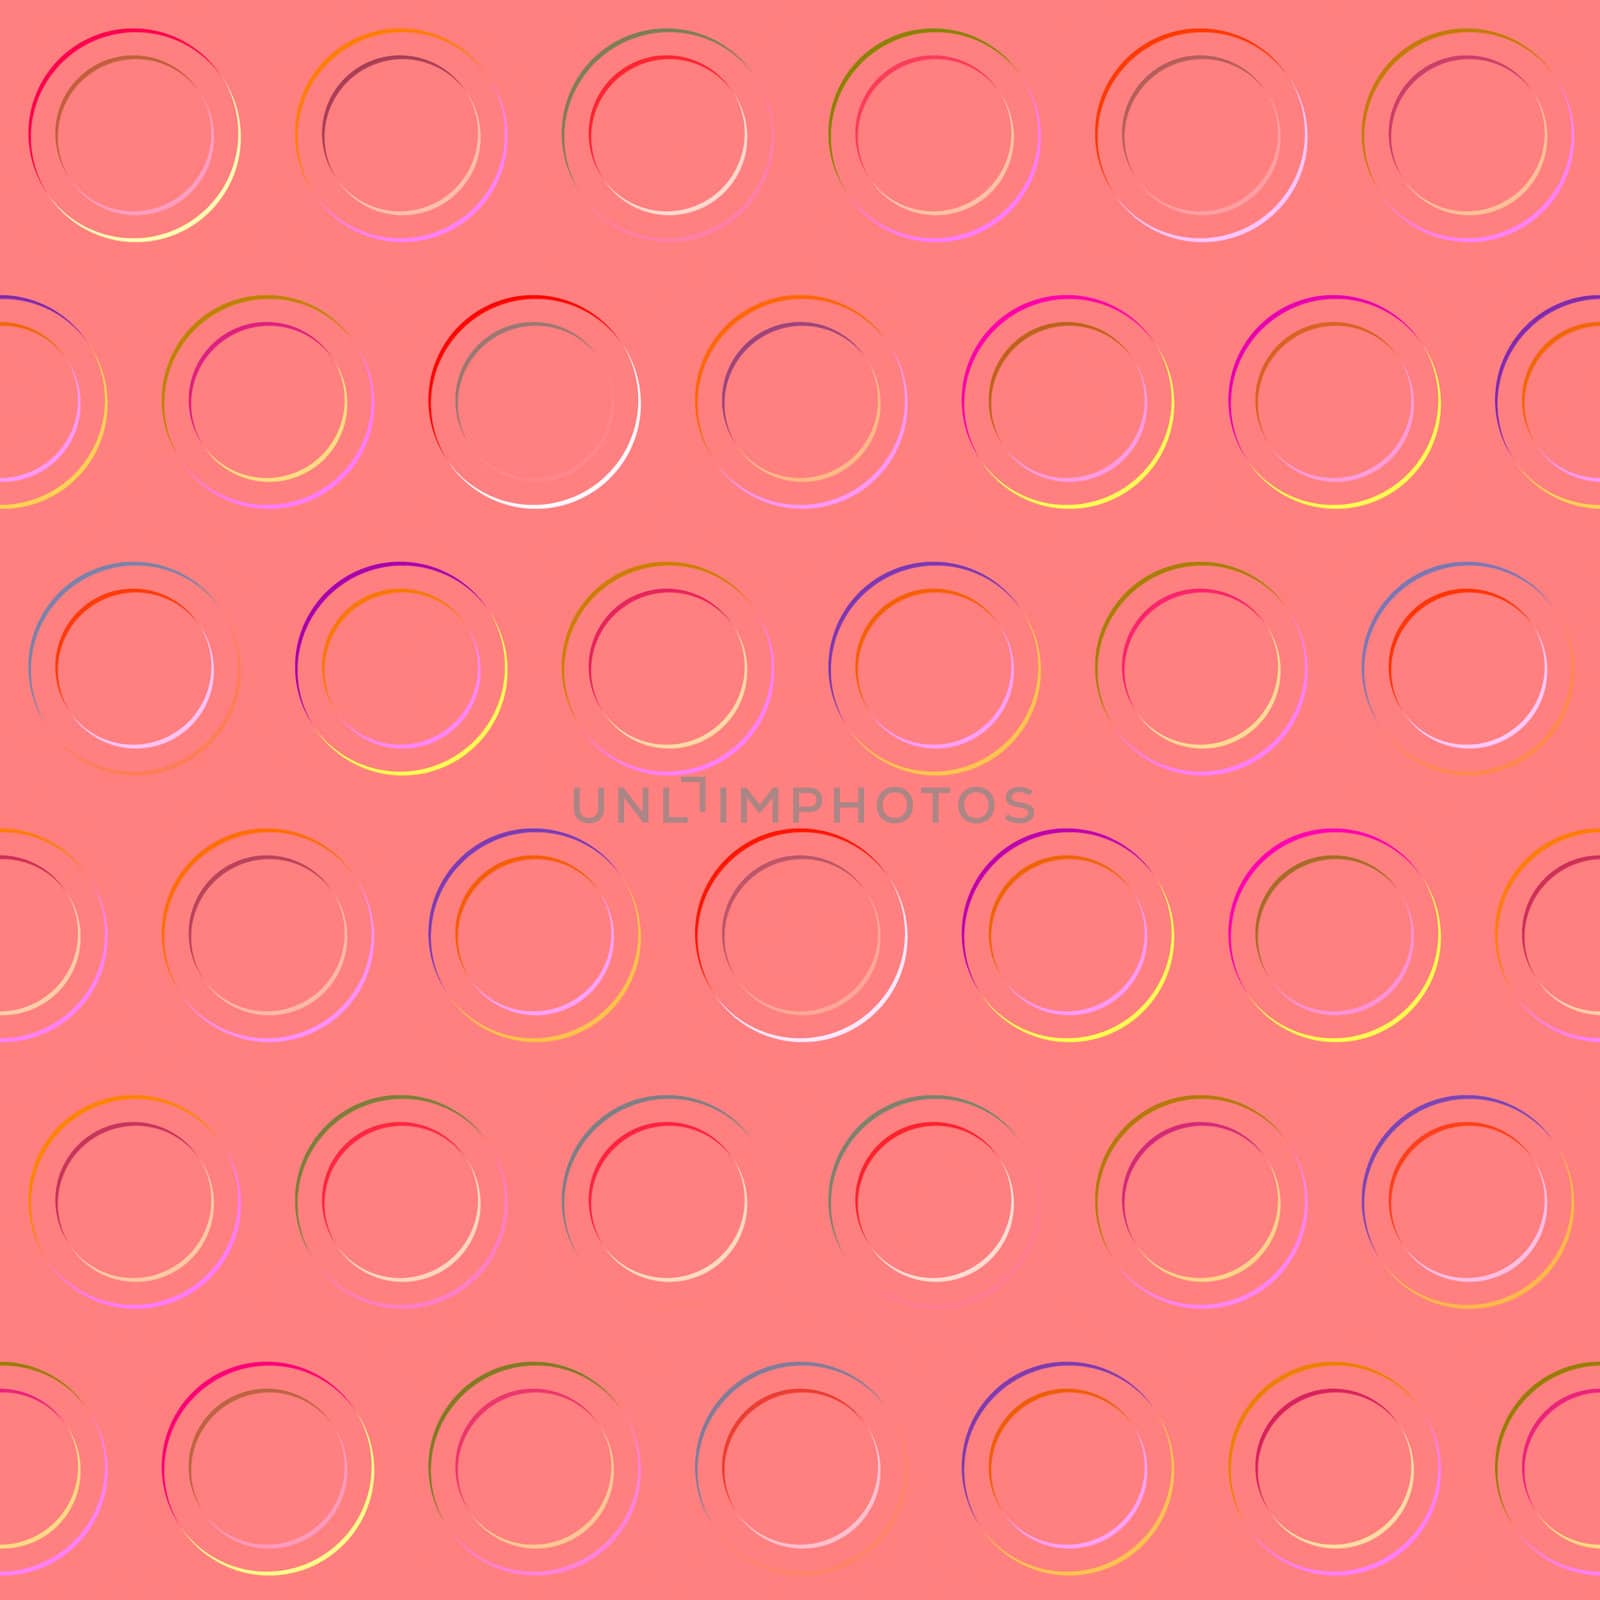 imprinted 3d rings pattern by weknow